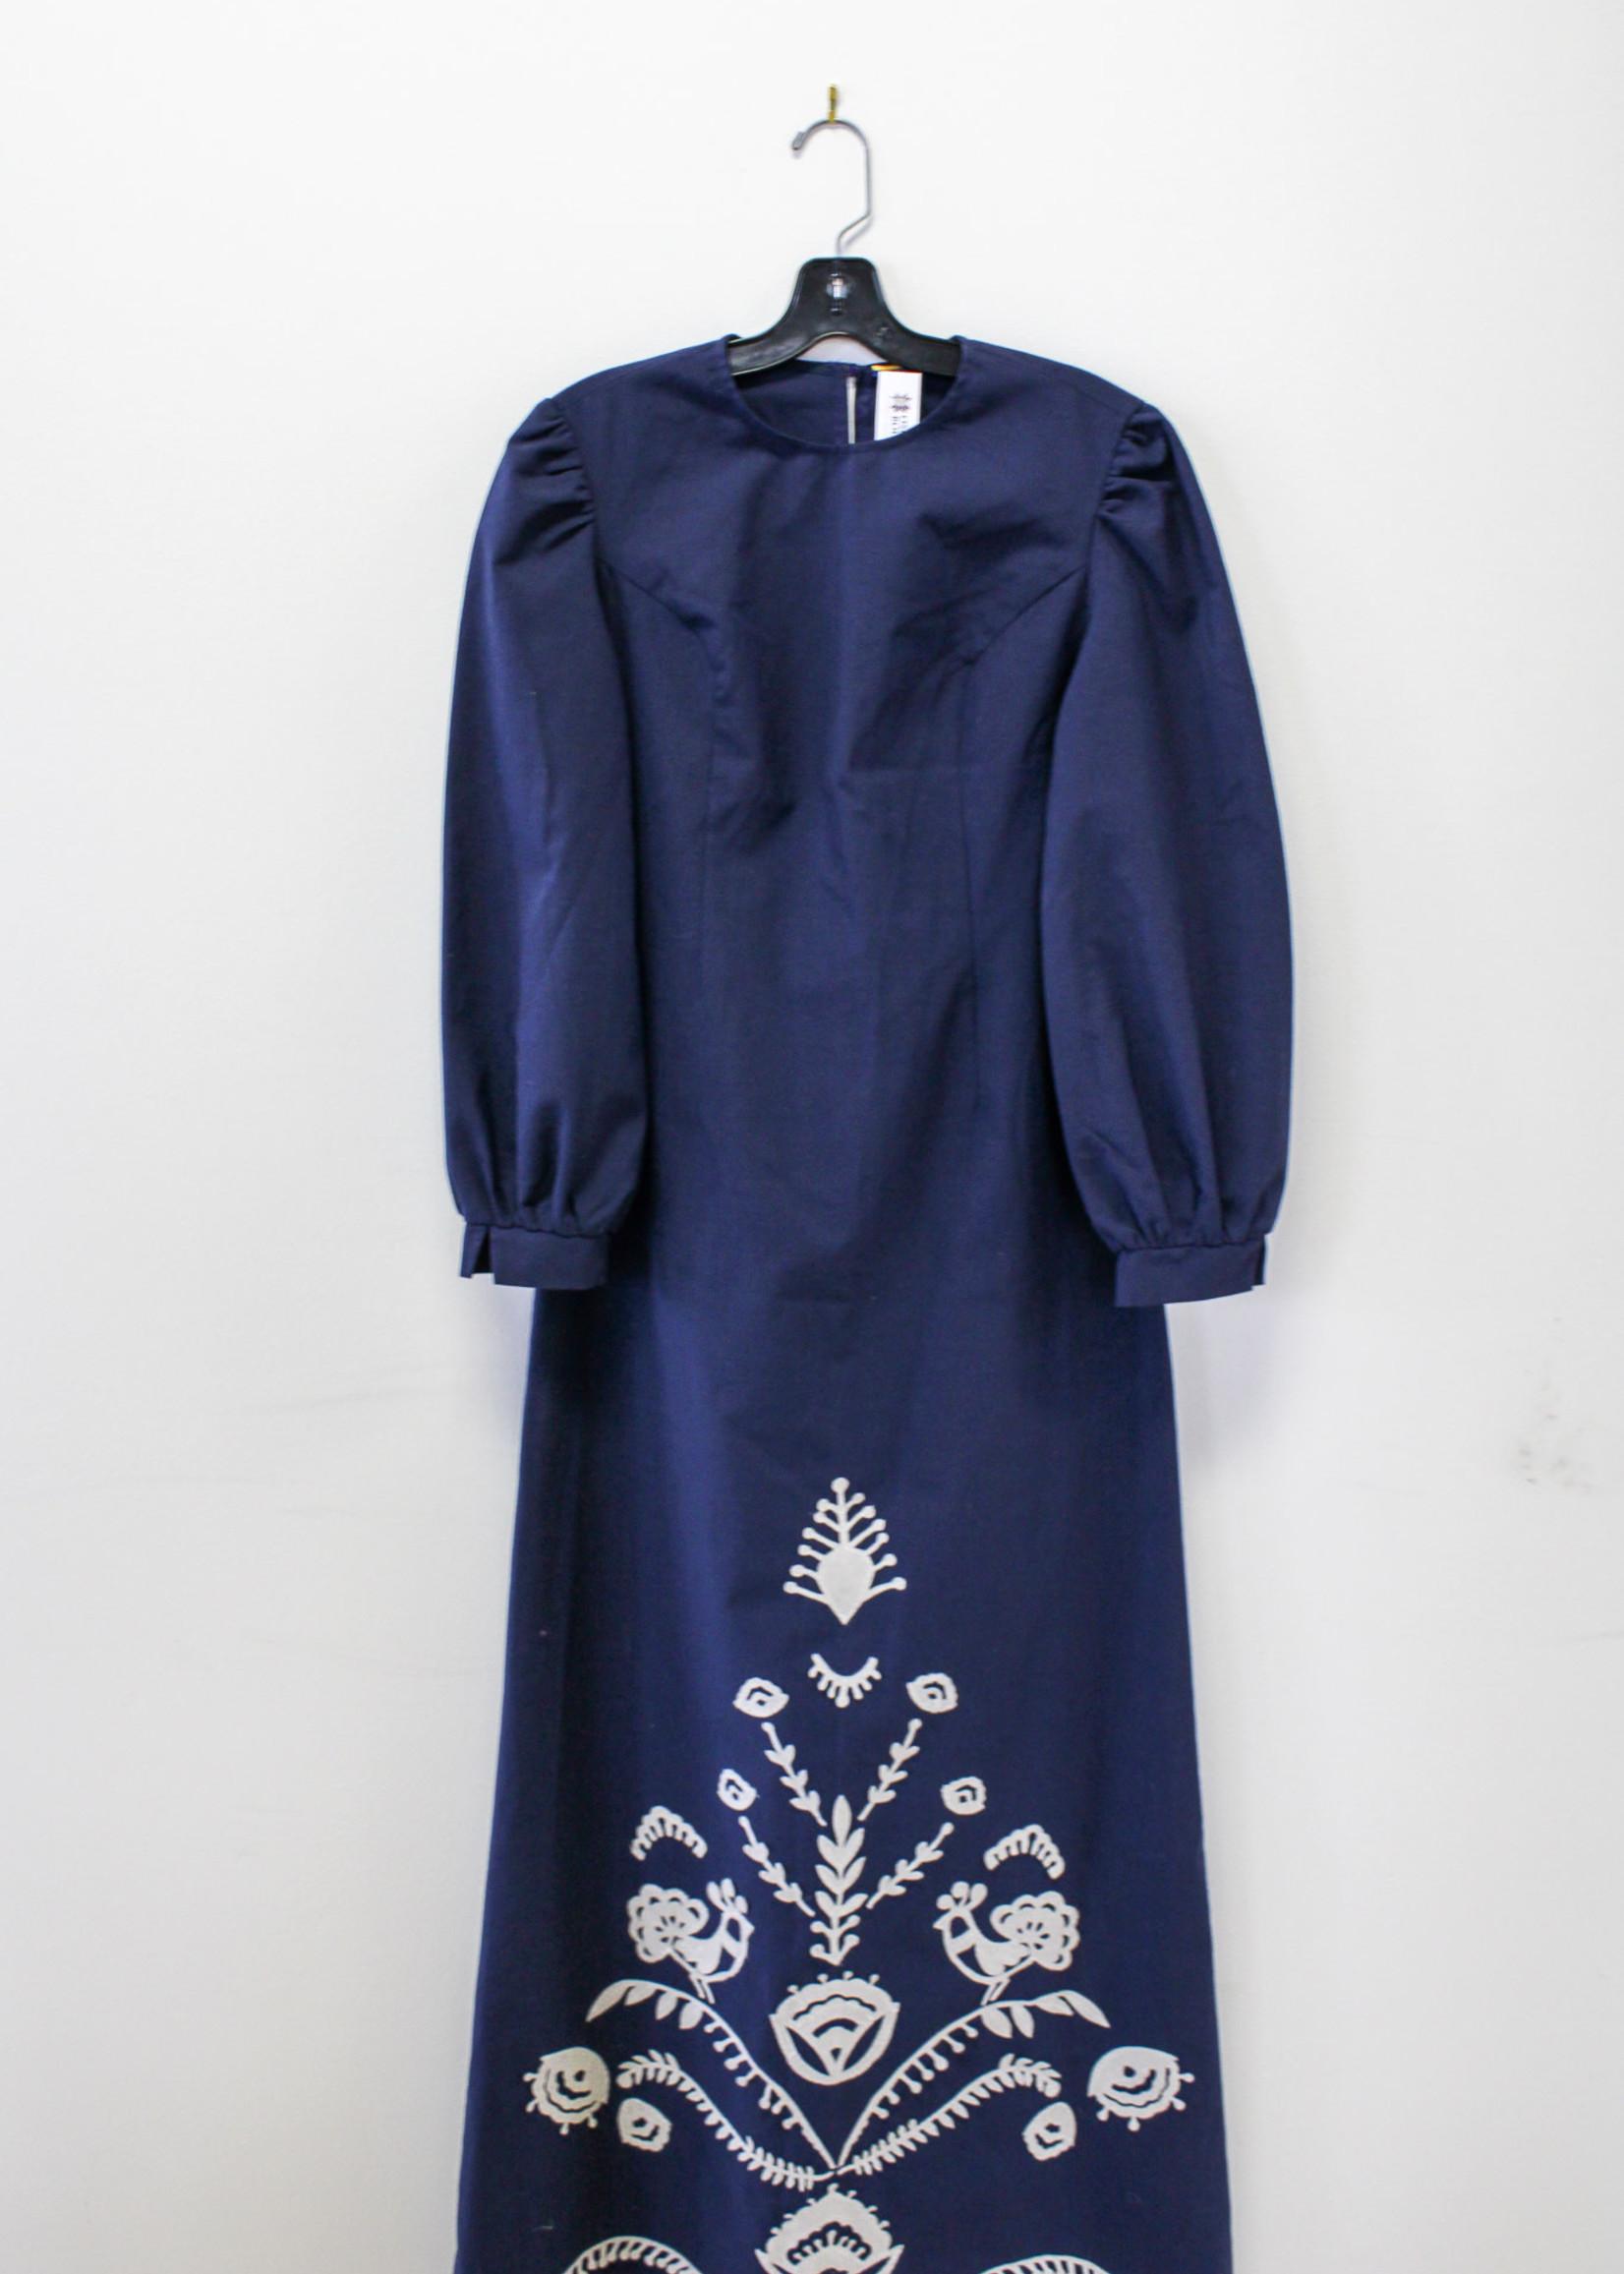 DRESS - Long Navy Blue with grey floral pattern (S)